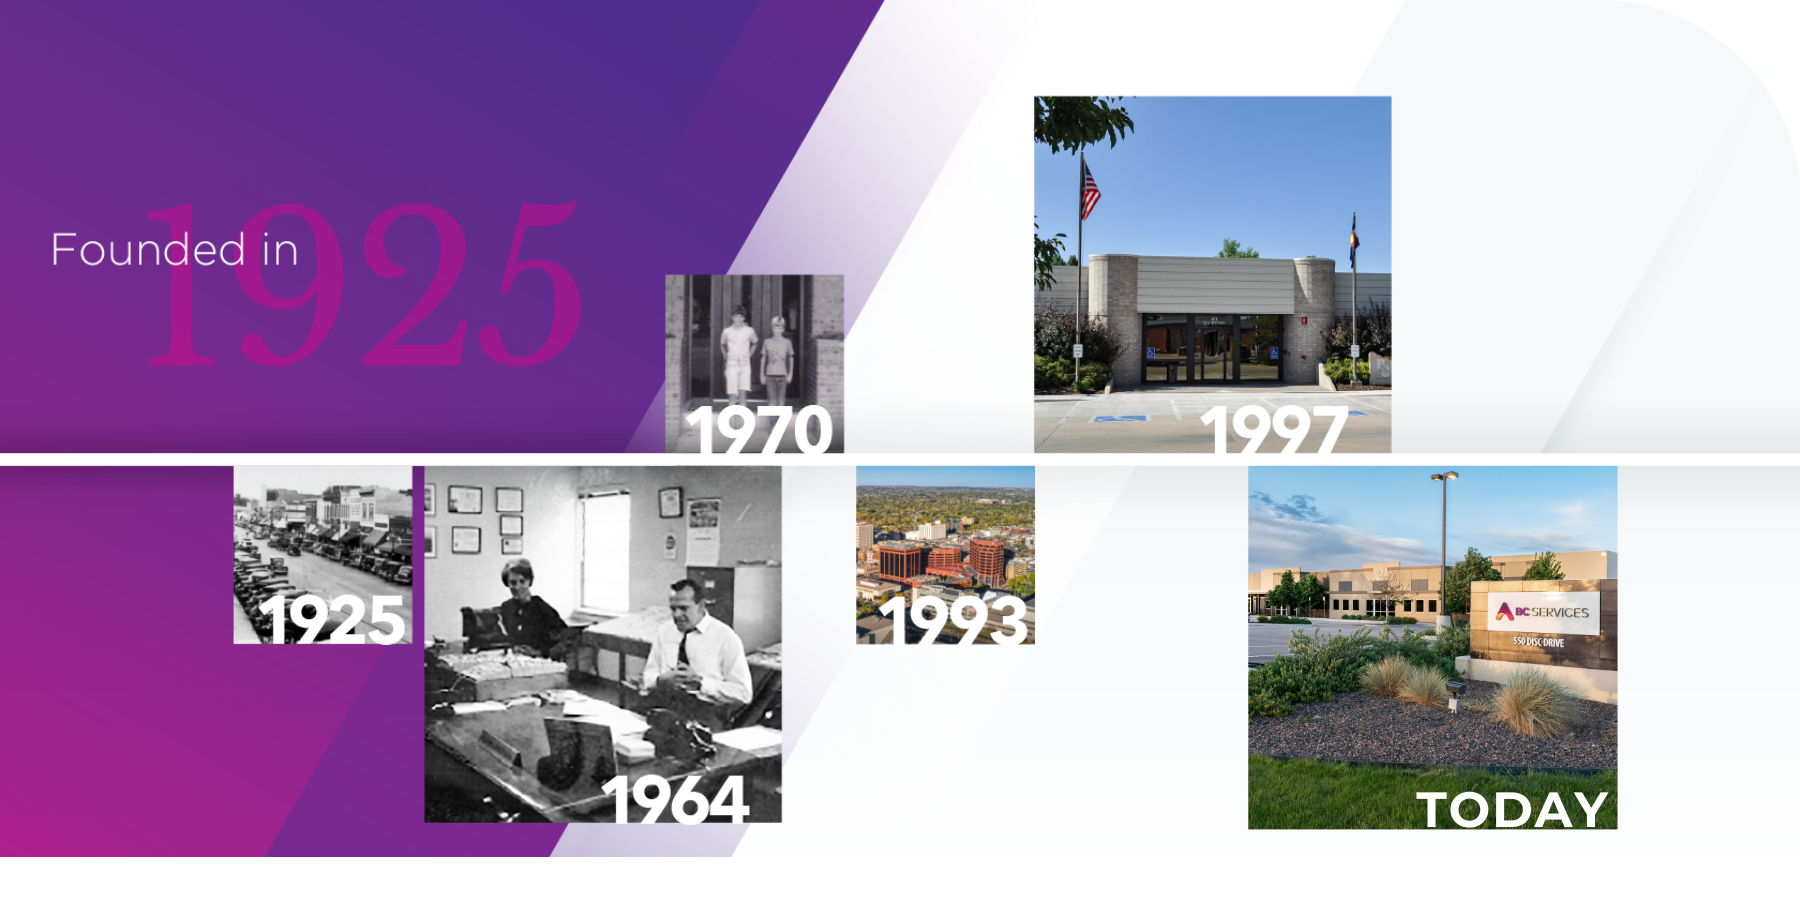 Company timeline, founded in 1925 grew into present time.